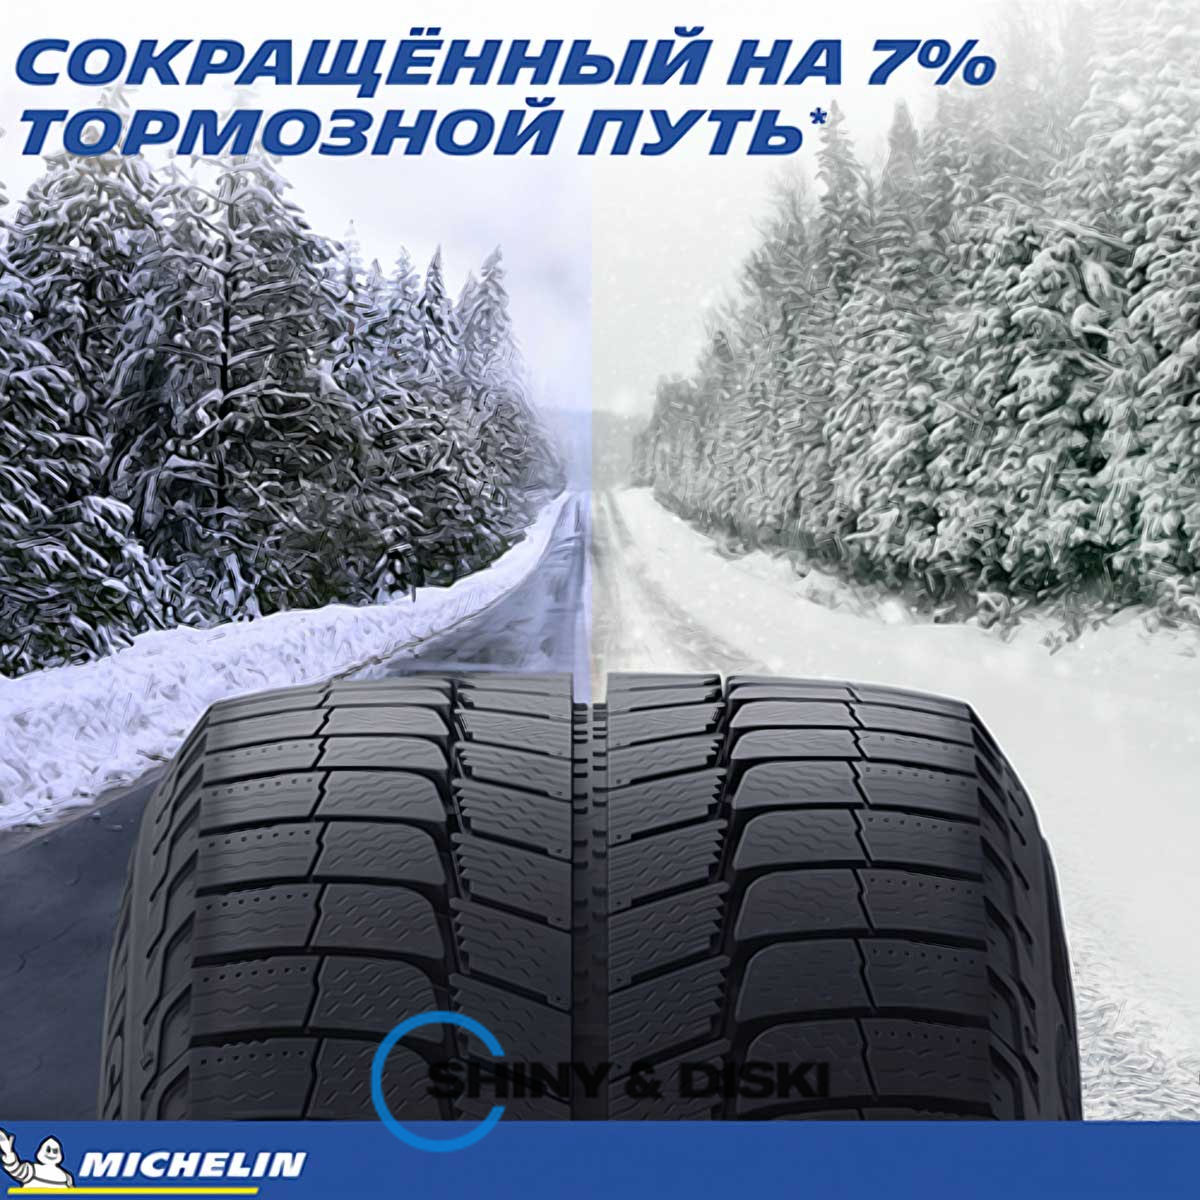 покришки michelin x-ice xi3+ 225/65 r17 102t